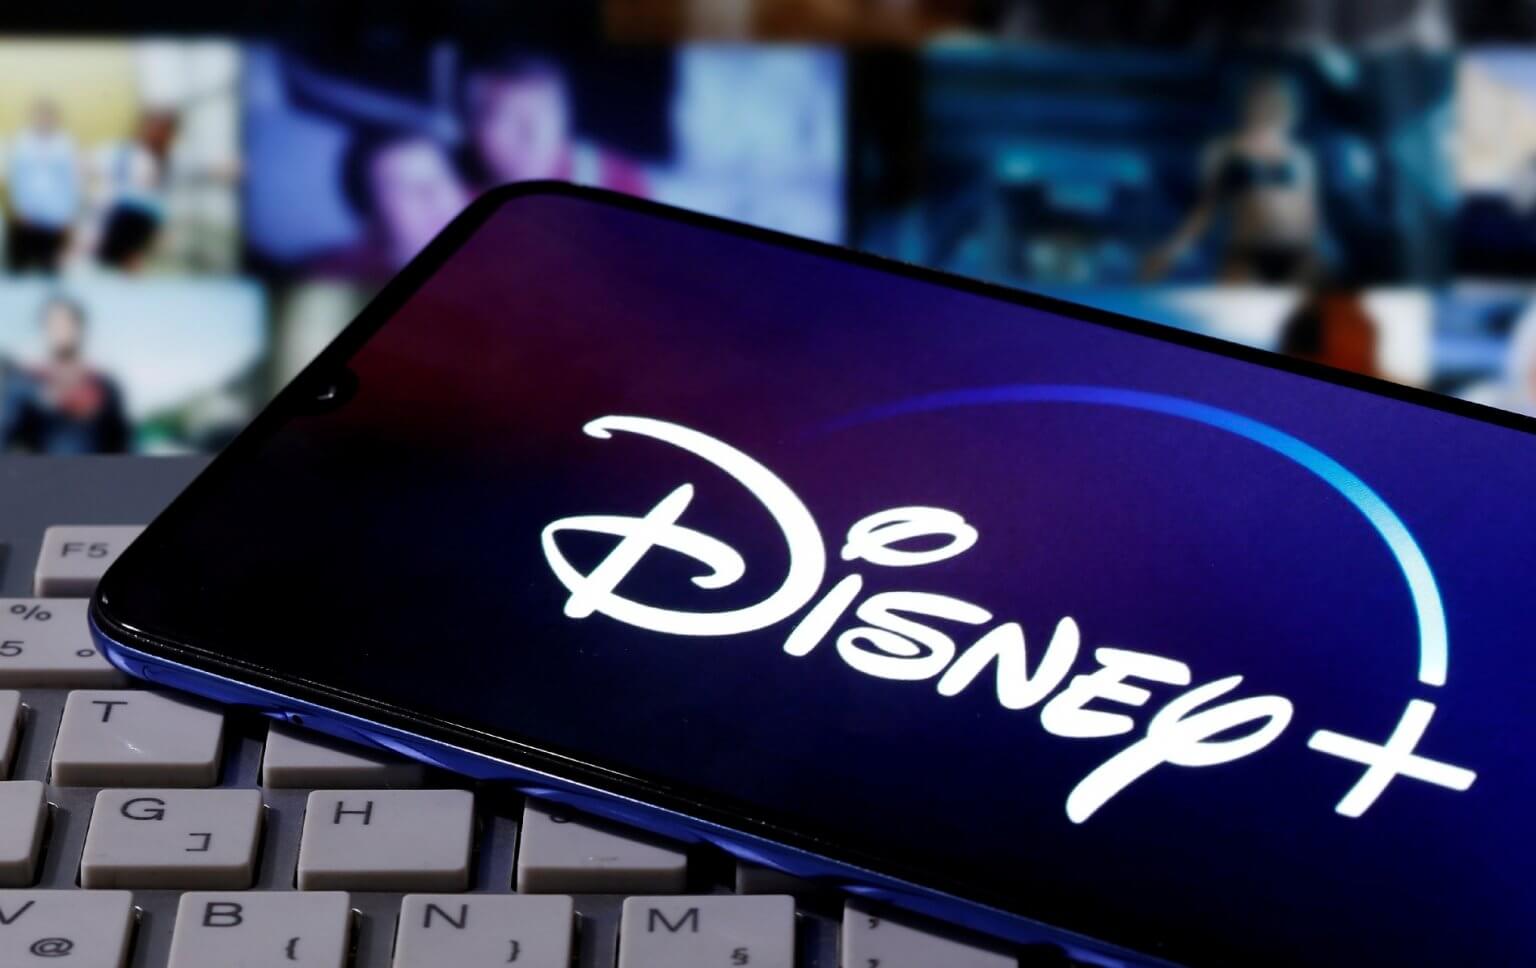 Disney Plus exceed 50 million subscribers, 22M+ new users in 2 months